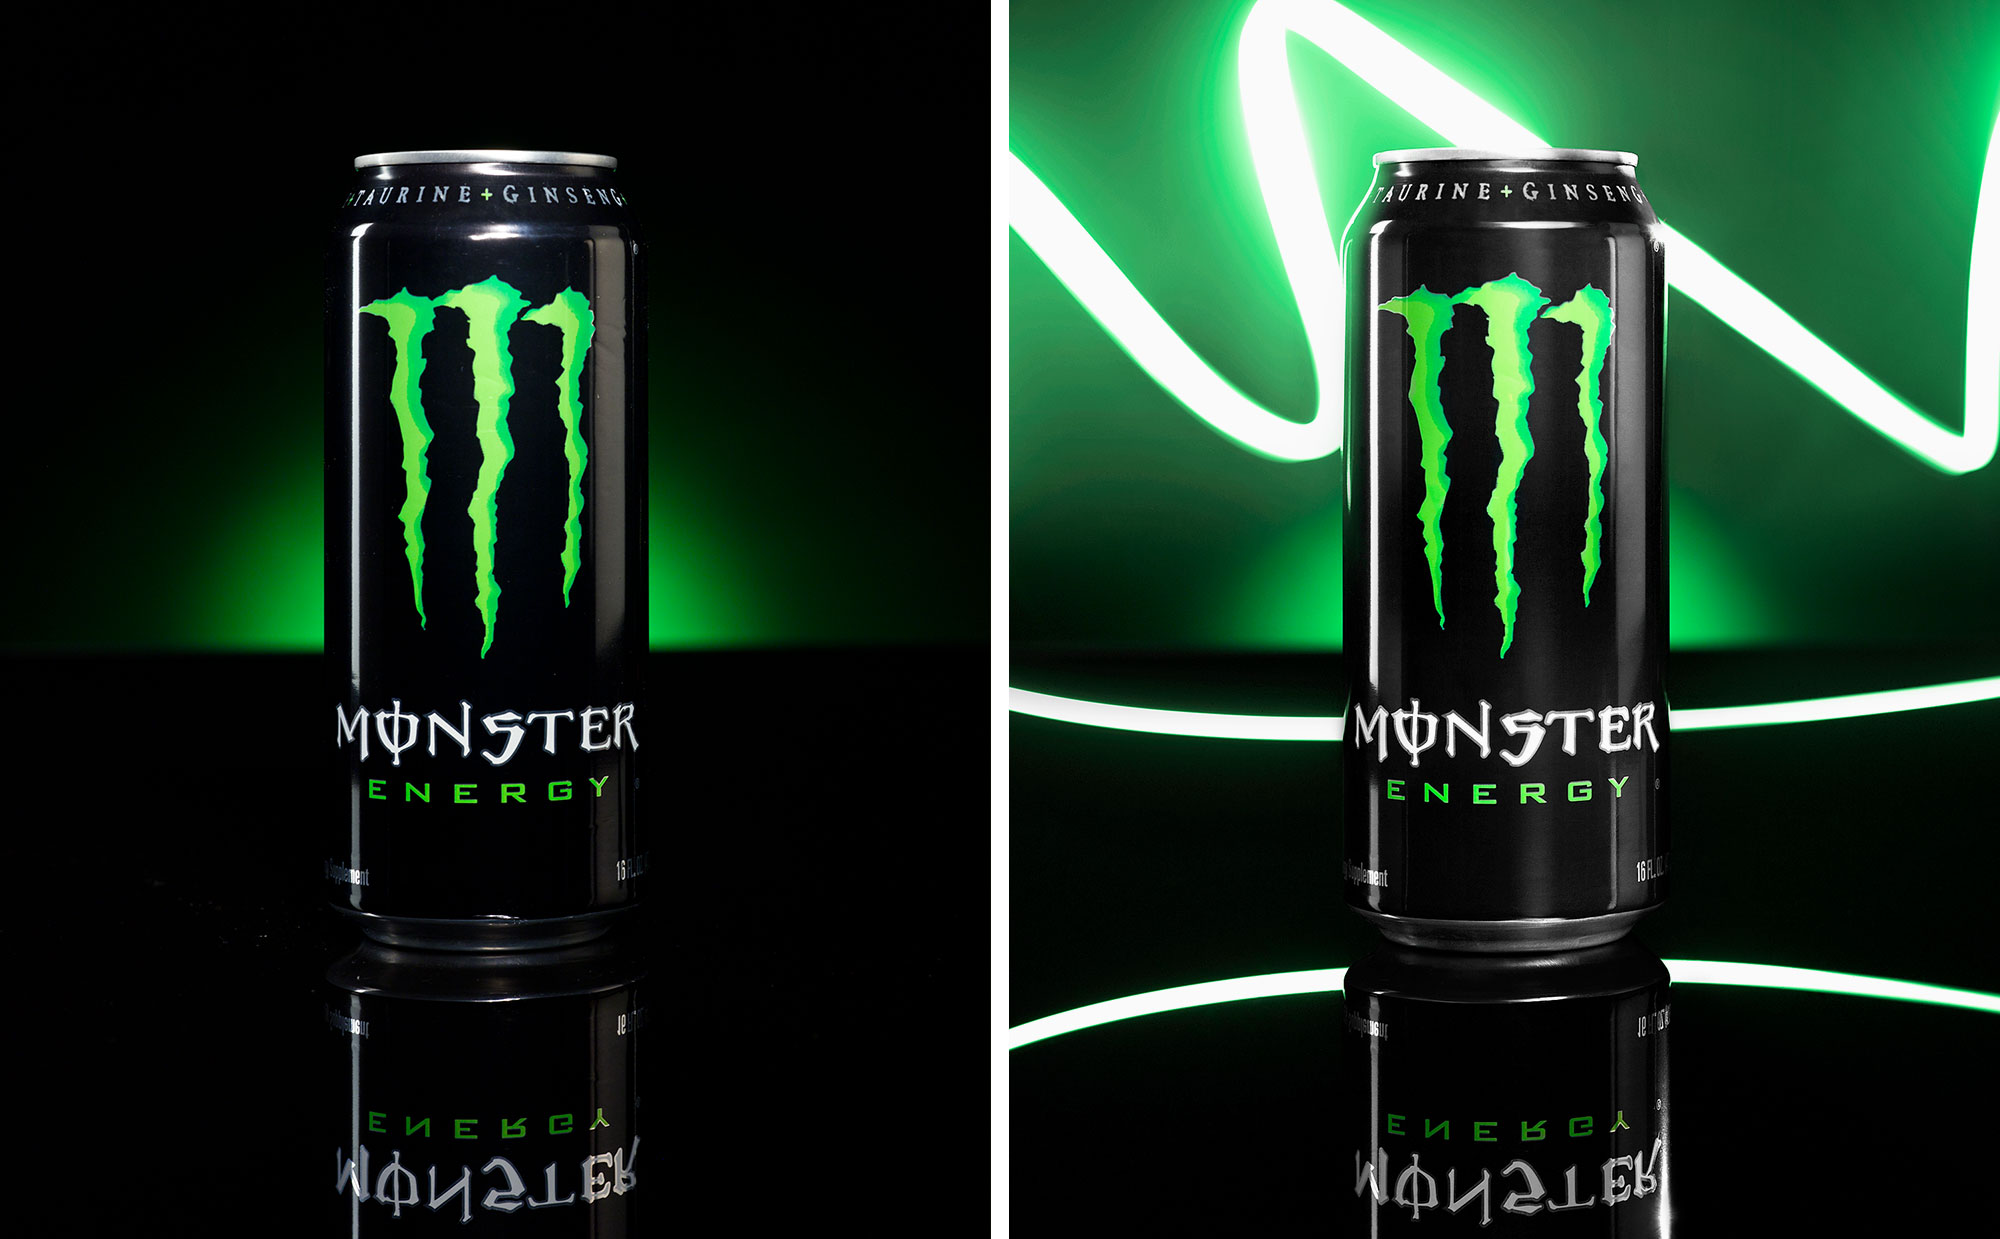 Professional Retouching I: Monster Energy Drink by Alex Kay